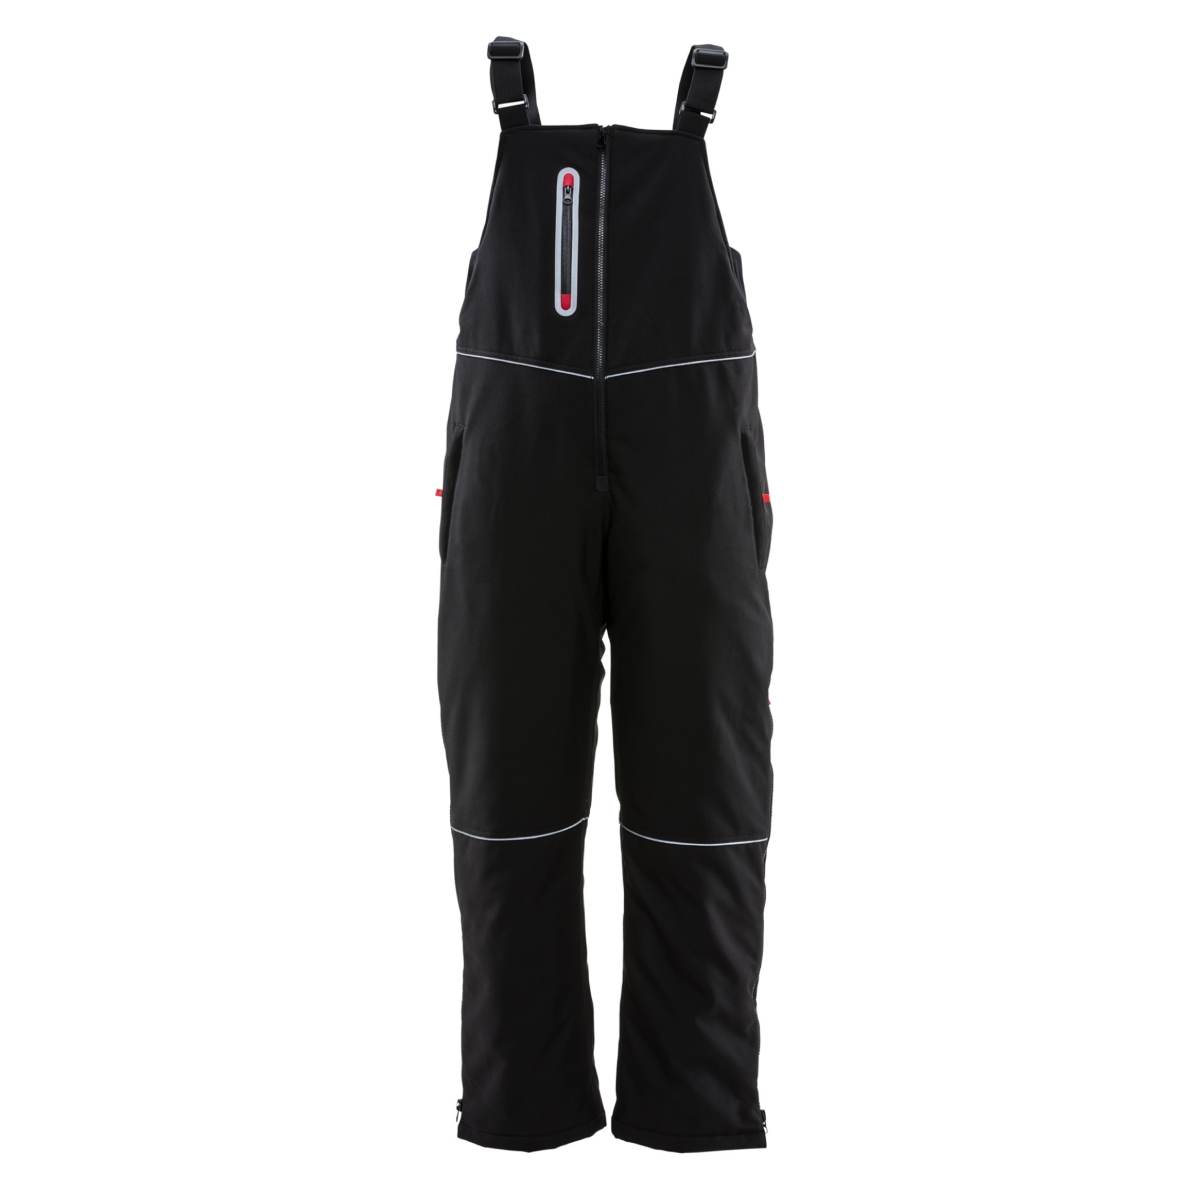 Women's Insulated Softshell Bib Overalls with Reflective Piping - Black